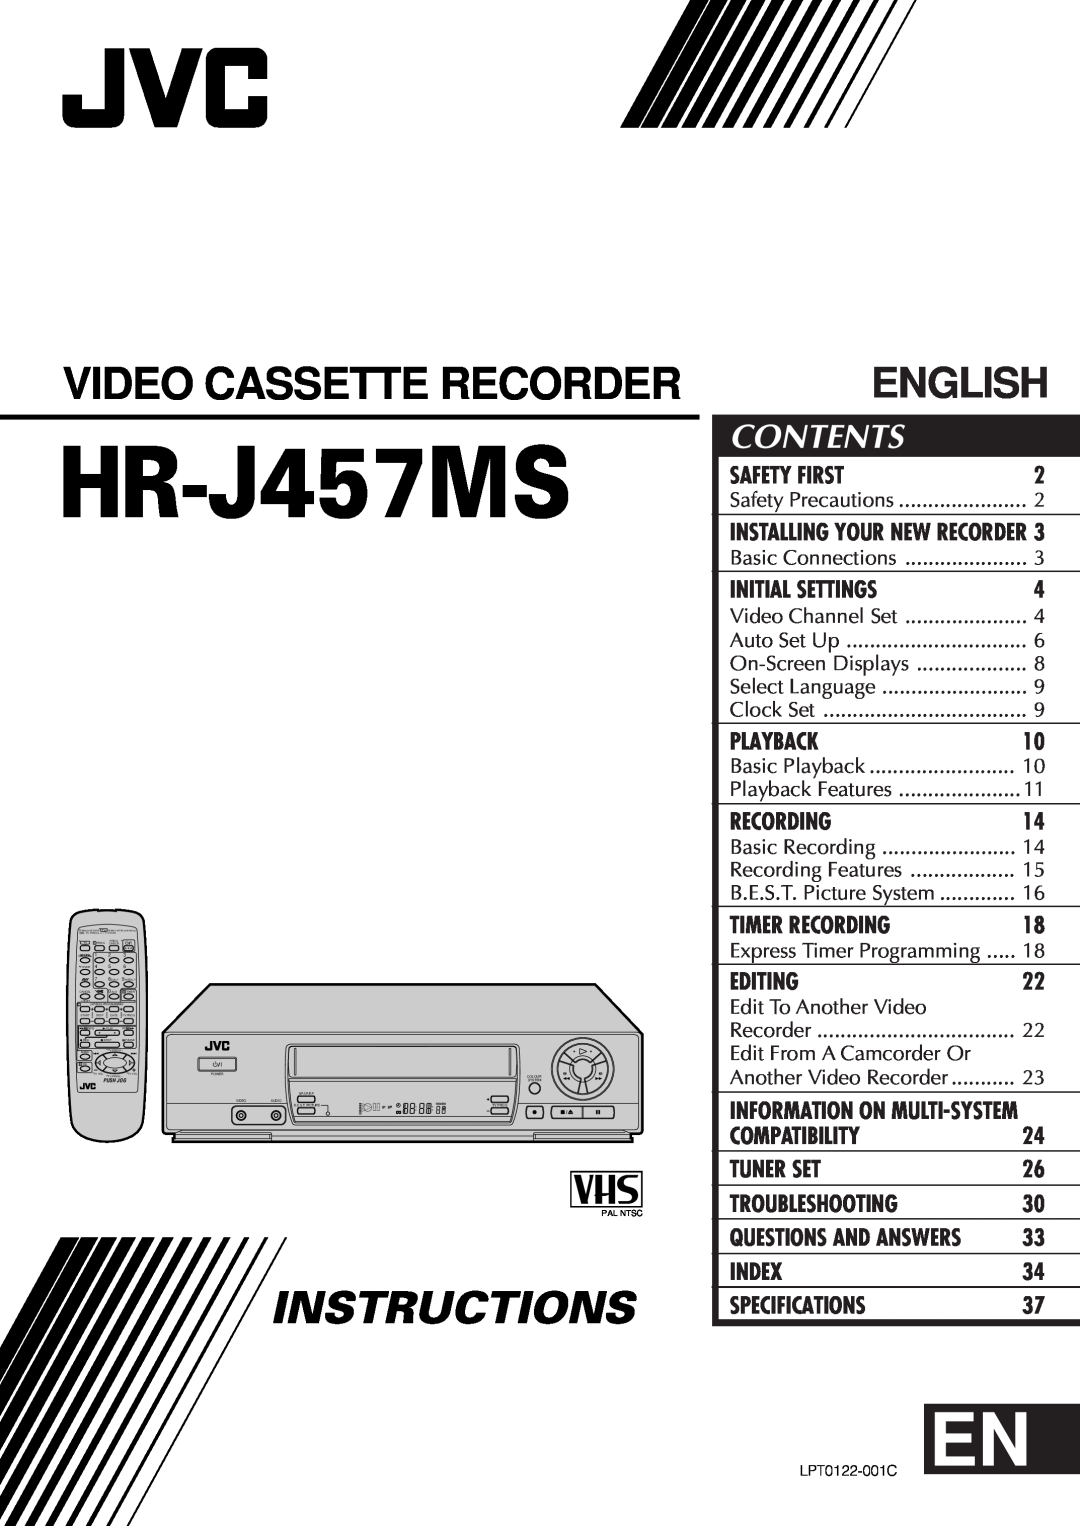 JVC HR-J457MS specifications Video Cassette Recorder, Instructions, English, Contents 